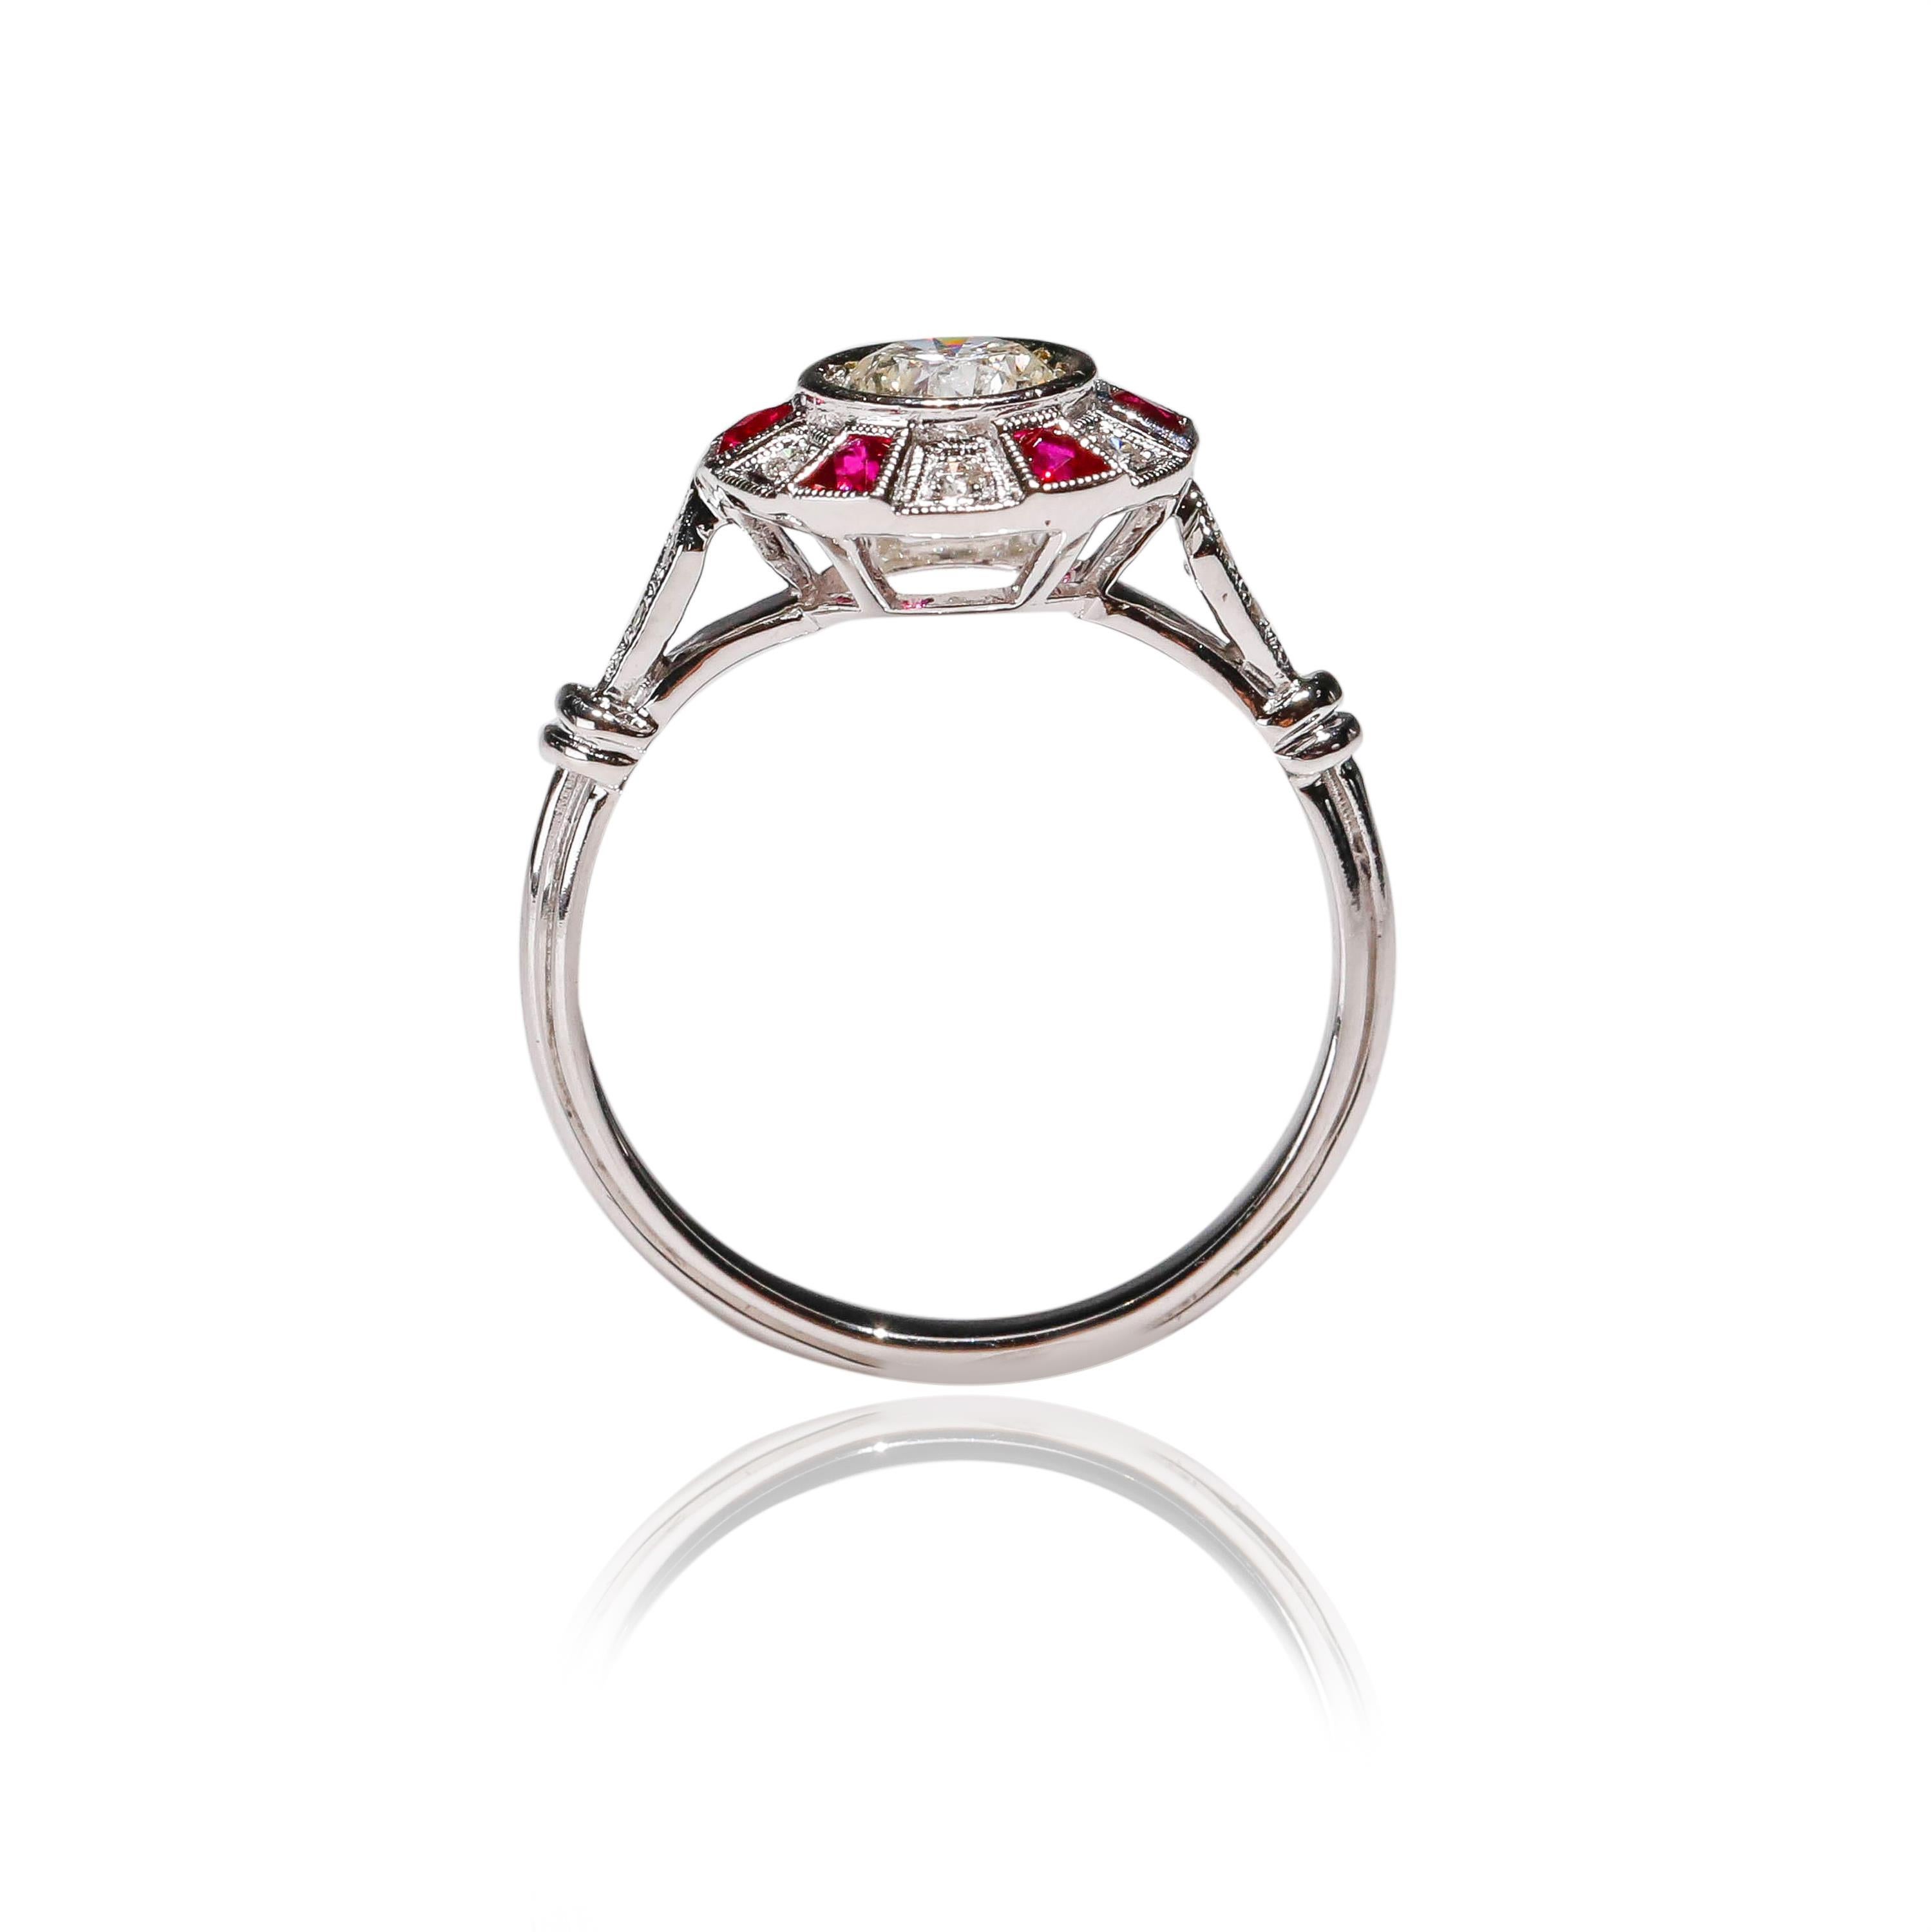 0.27 Ct Ruby Diamond 18Kt White Gold Round Cocktail Halo Ring Art Deco Style For Sale 2